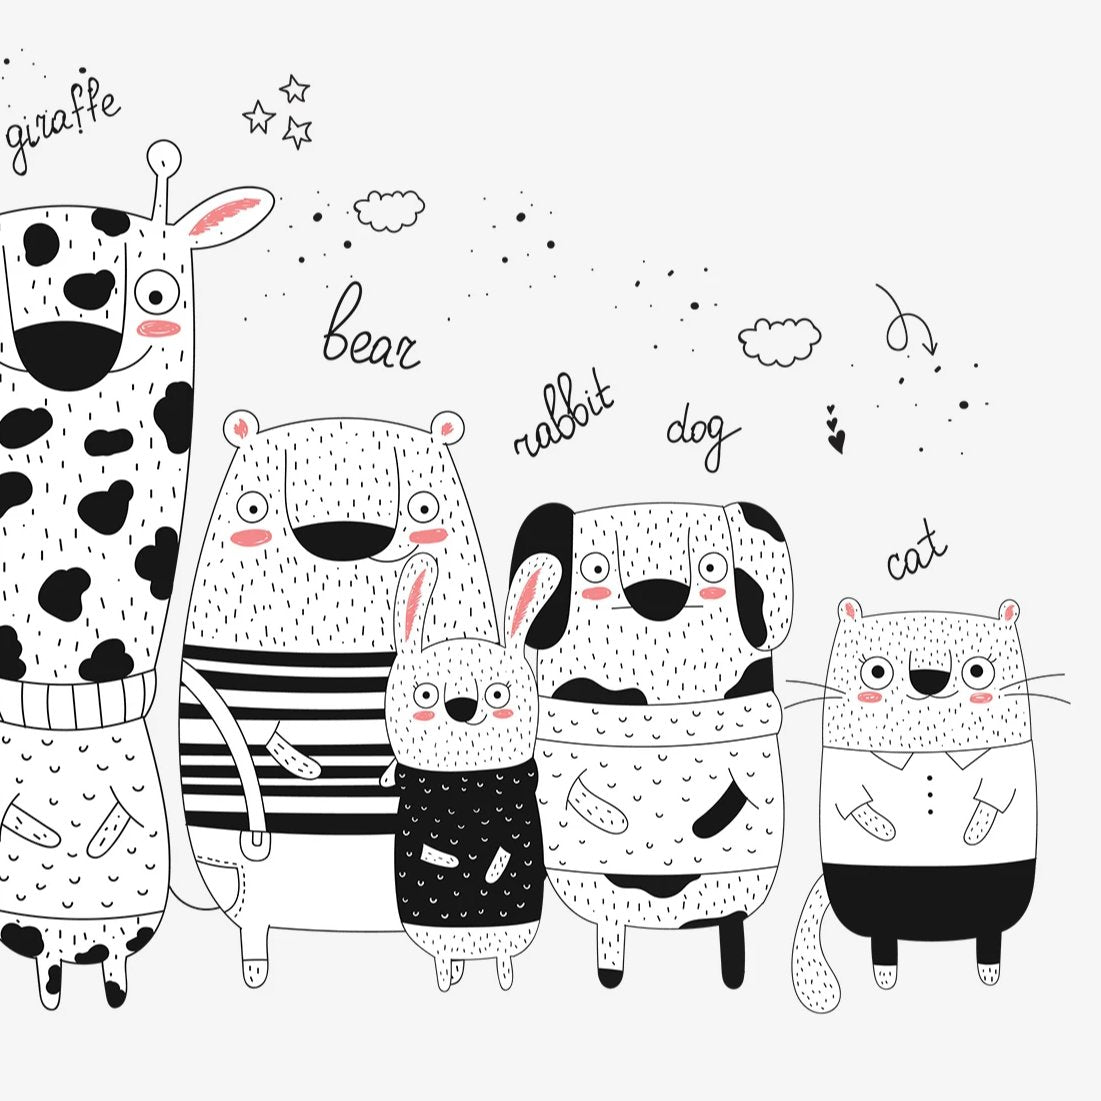 Kids room animal wallpaper featuring giraffe, bear, rabbit, dog, and cat in black and white